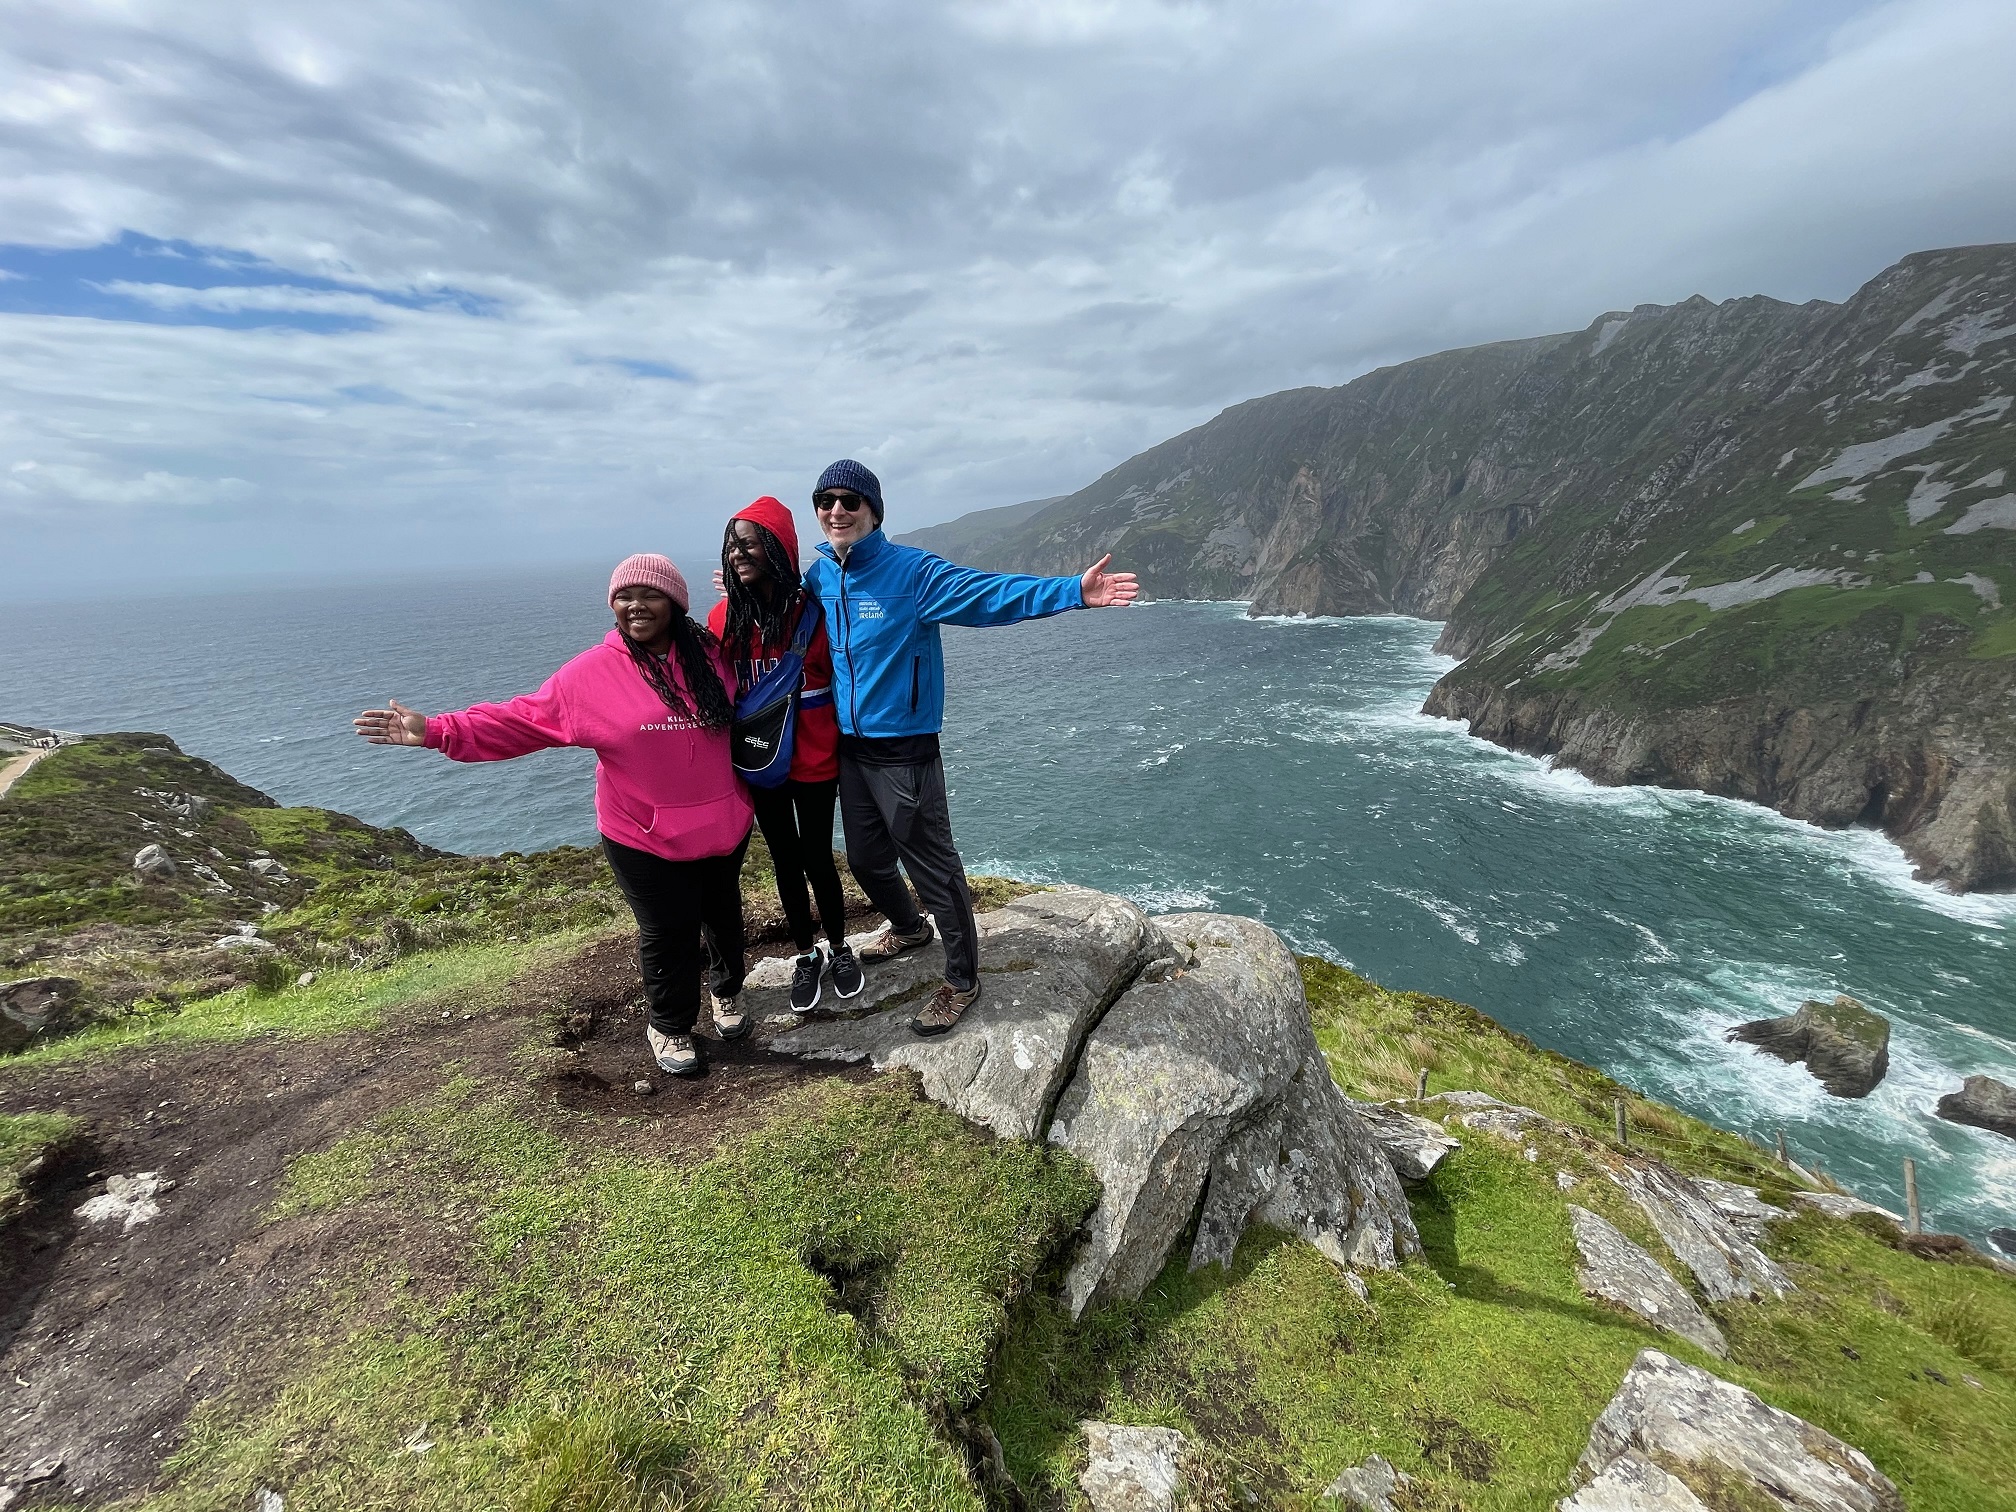 Zanobia Anderson, Brookyln Phillips and Scott Hughes, join together for a photo at the top of Sliabh Liag Cliffs in Donegal, Ireland.